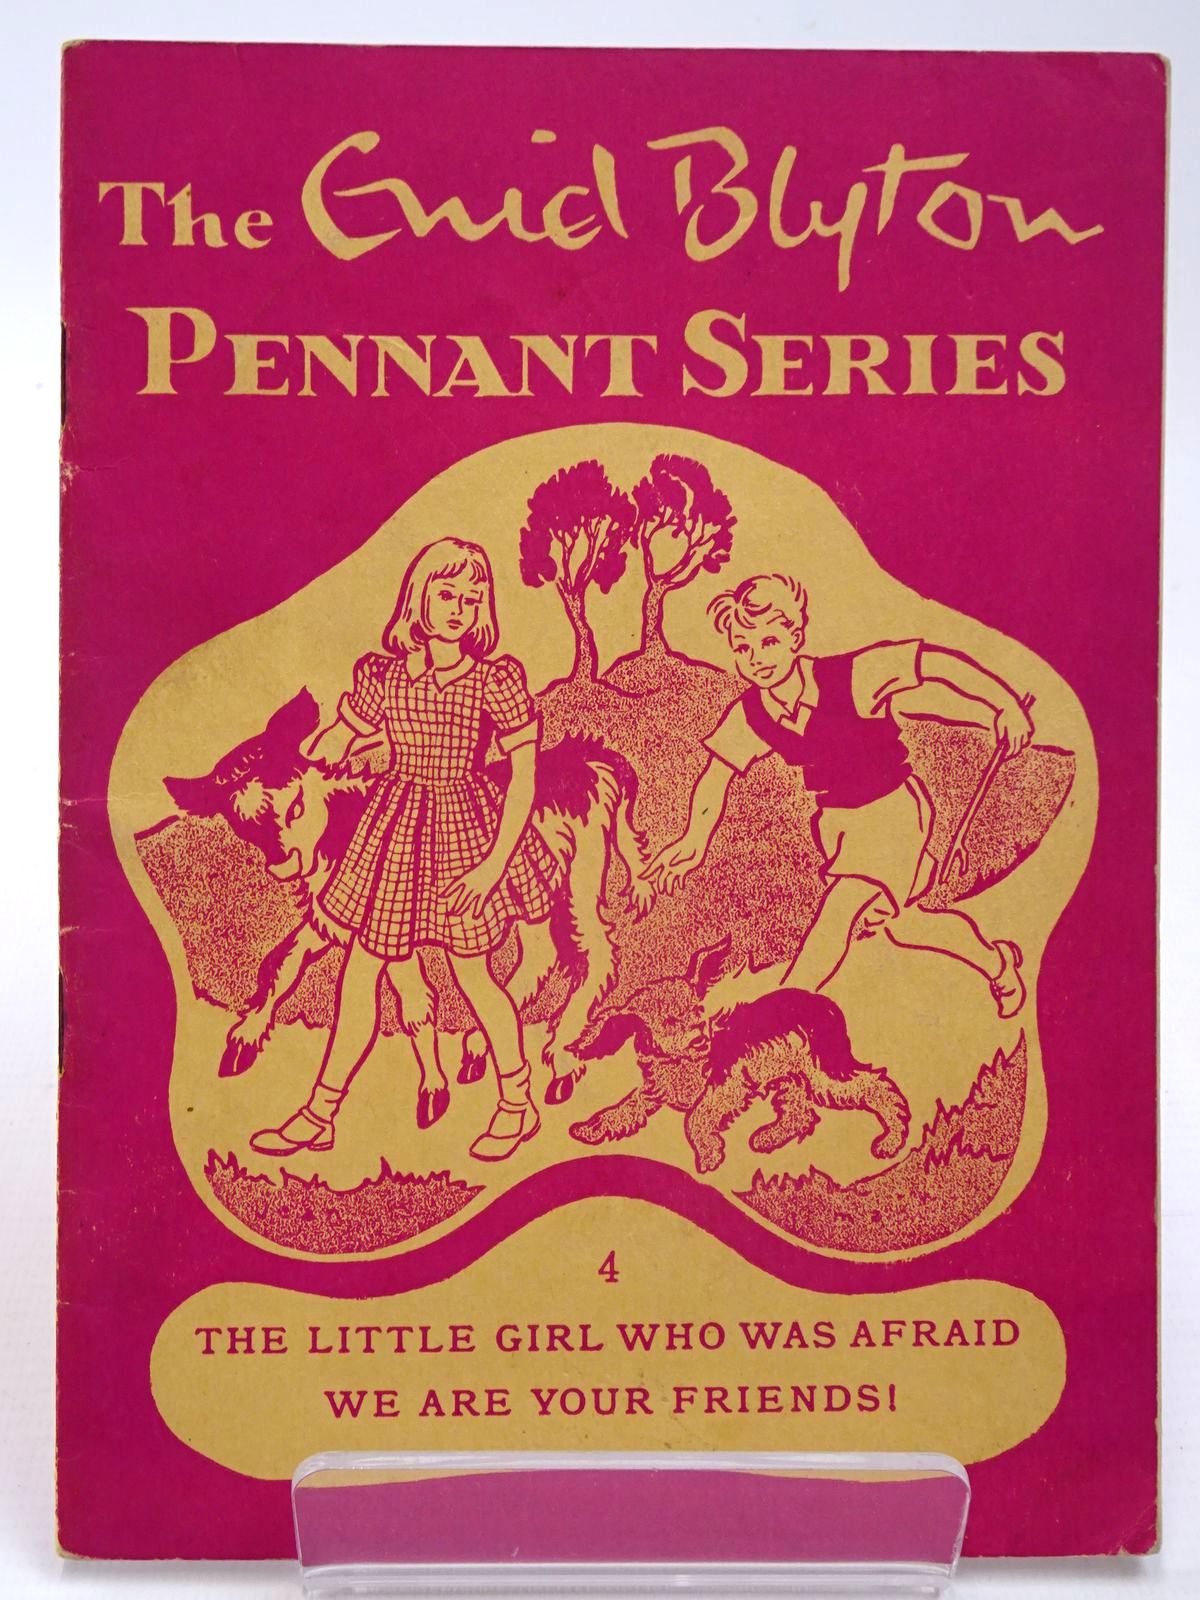 Photo of THE ENID BLYTON PENNANT SERIES No. 4 THE LITTLE GIRL WHO WAS AFRAID / WE ARE YOUR FRIENDS! written by Blyton, Enid illustrated by Main, Jean published by Macmillan &amp; Co. Ltd. (STOCK CODE: 2130524)  for sale by Stella & Rose's Books